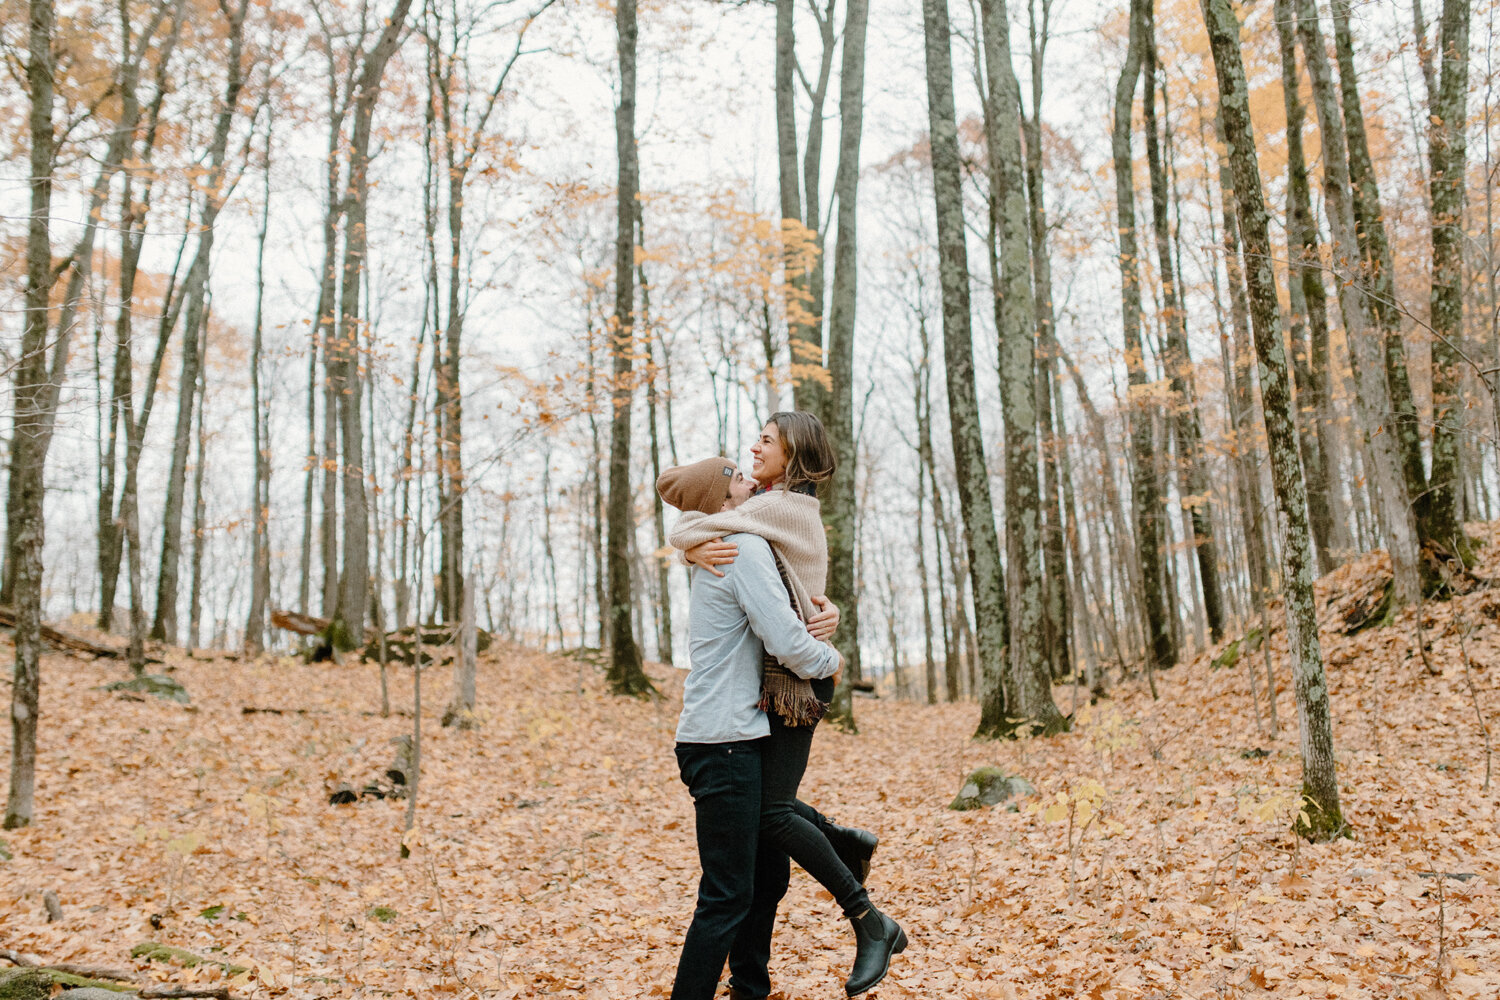  Quebec, Canada’s Chelsea Mason Photography captures this energetic couple lifting one another and laughing during their autumn engagement session in the forrest. Forrest canadian engagement session, man lifting woman with woman lifting her feet, man